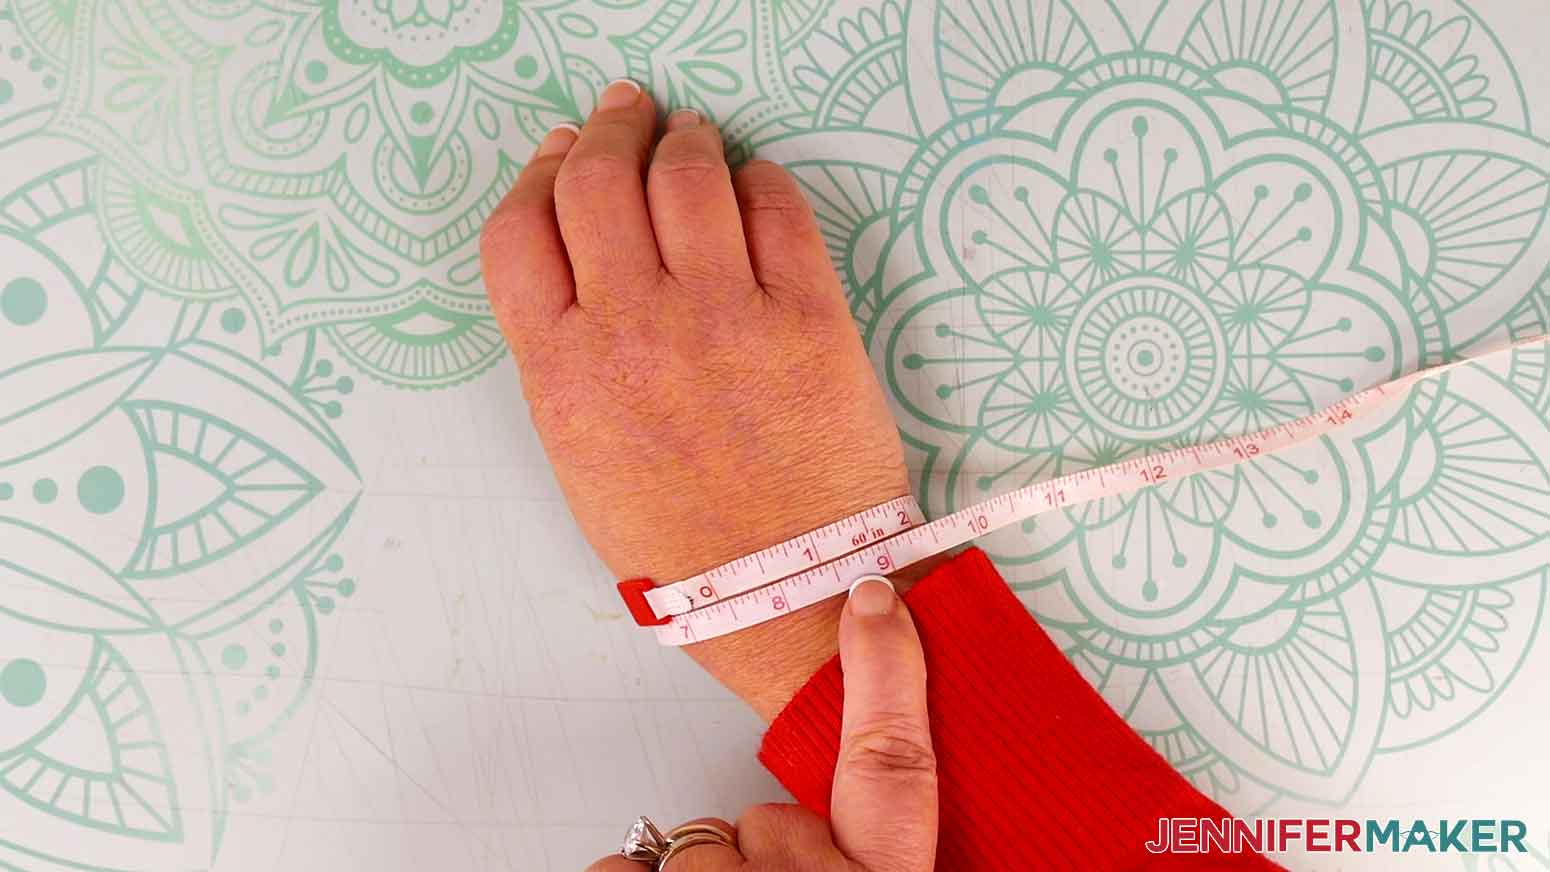 Use a soft measuring tape to measure your wrist for the best fitting faux leather bracelet.